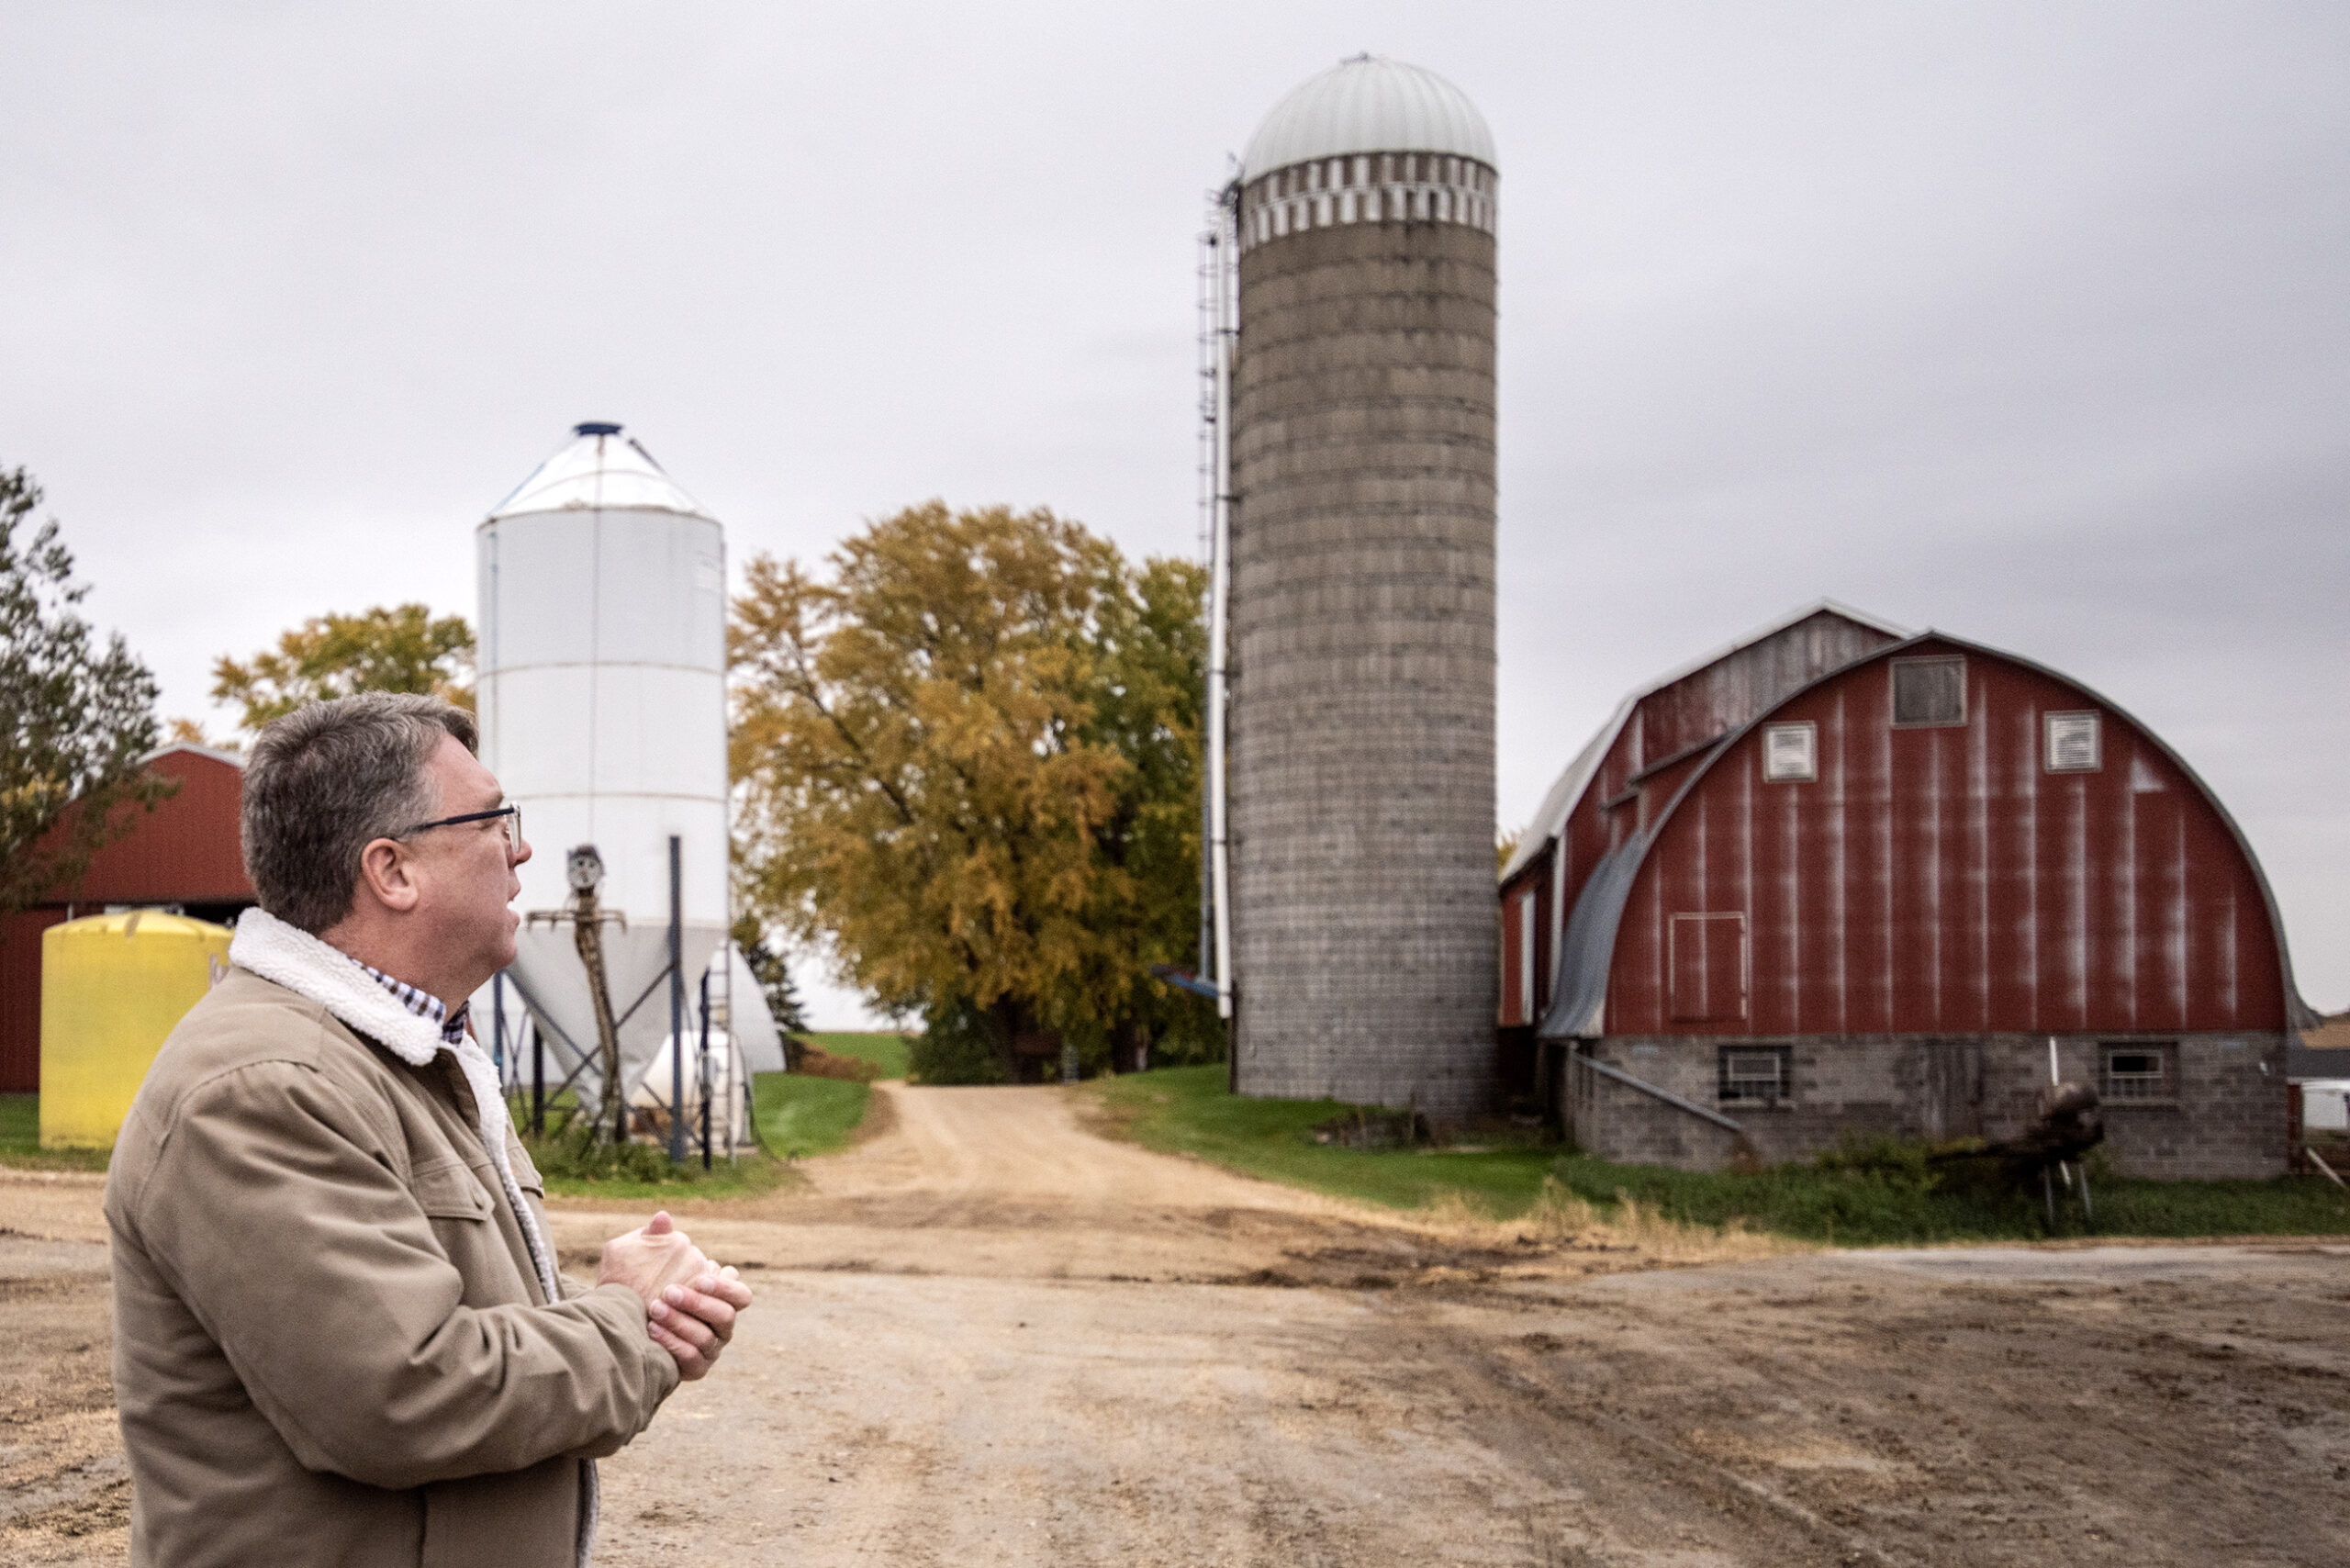 Brad Pfaff stands outside in front of a red barn and old silo.